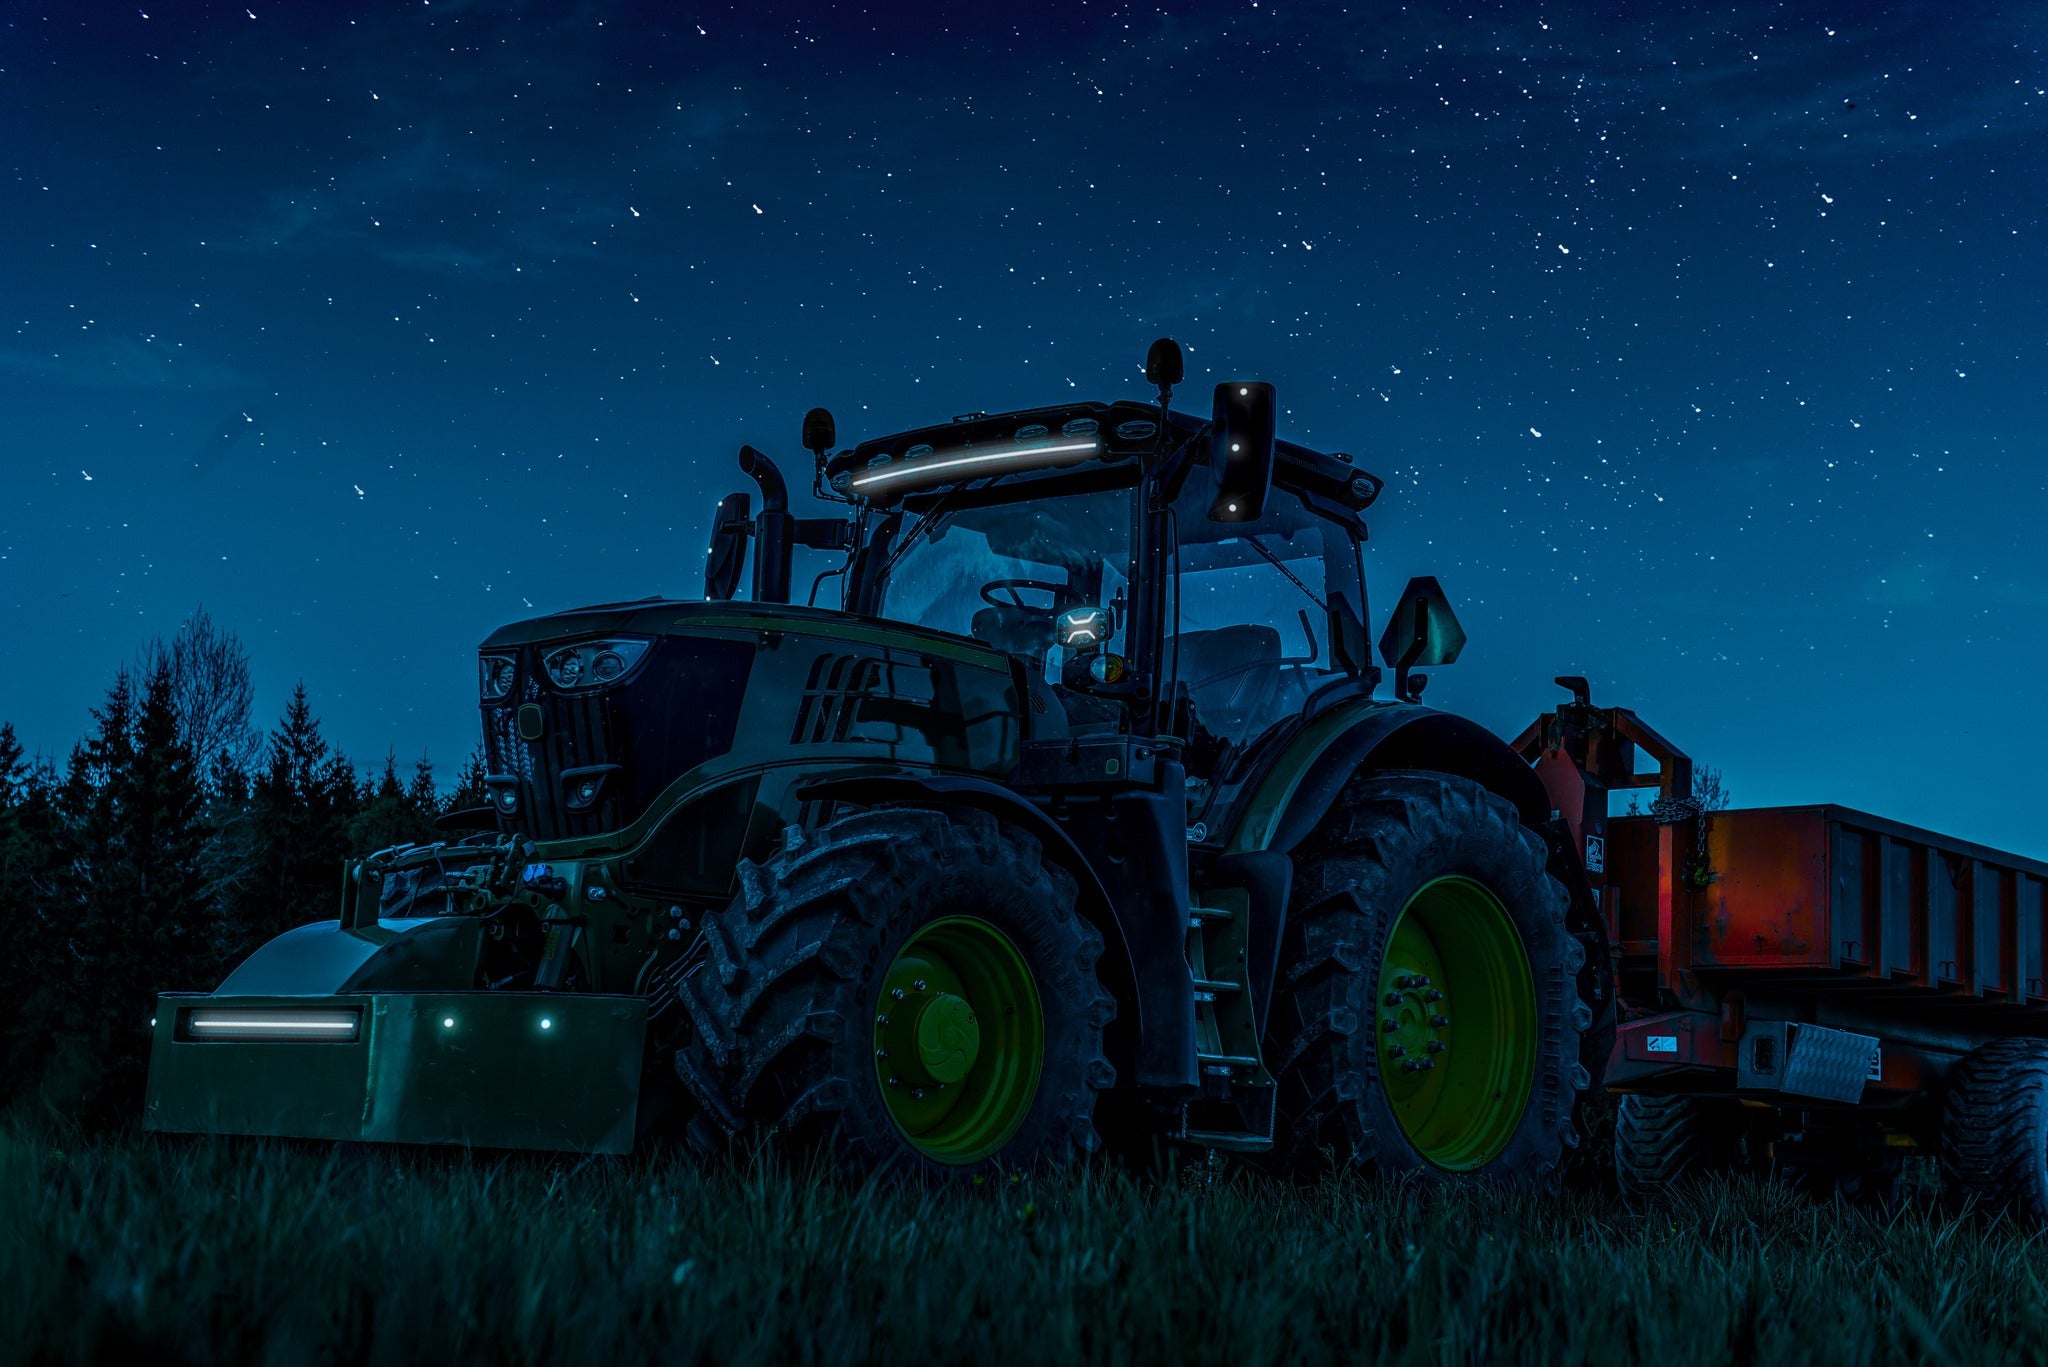 strands led light bar fitted on a new holland tractor